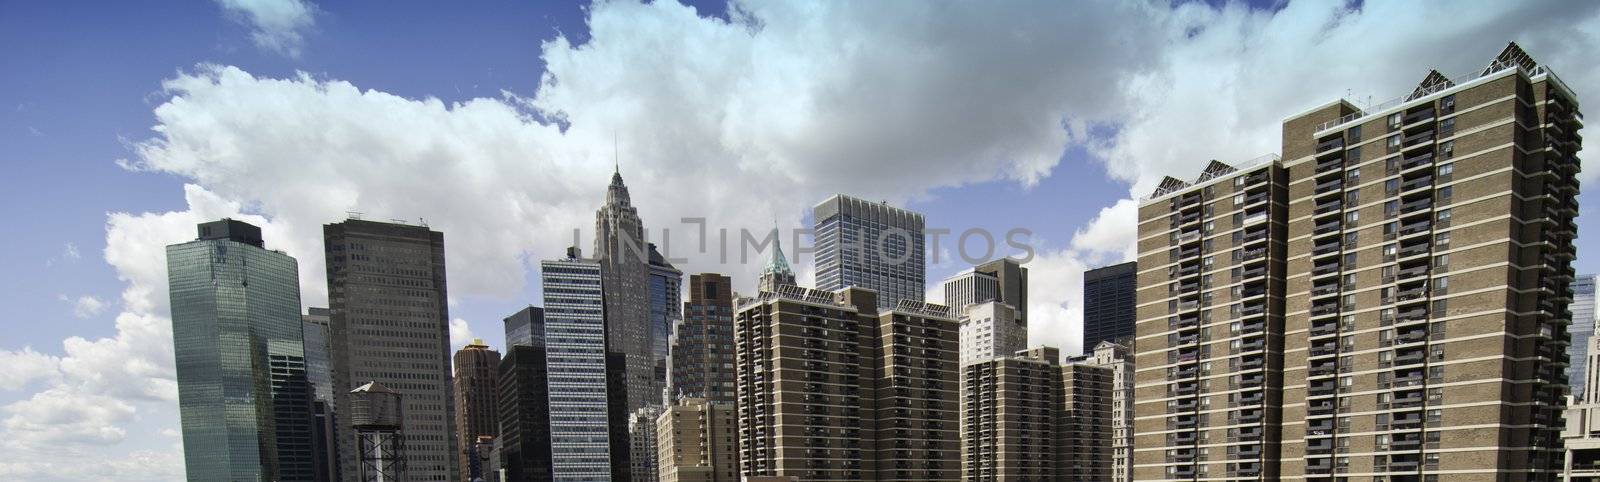 Panoramic View of New York City Buildings, U.S.A.